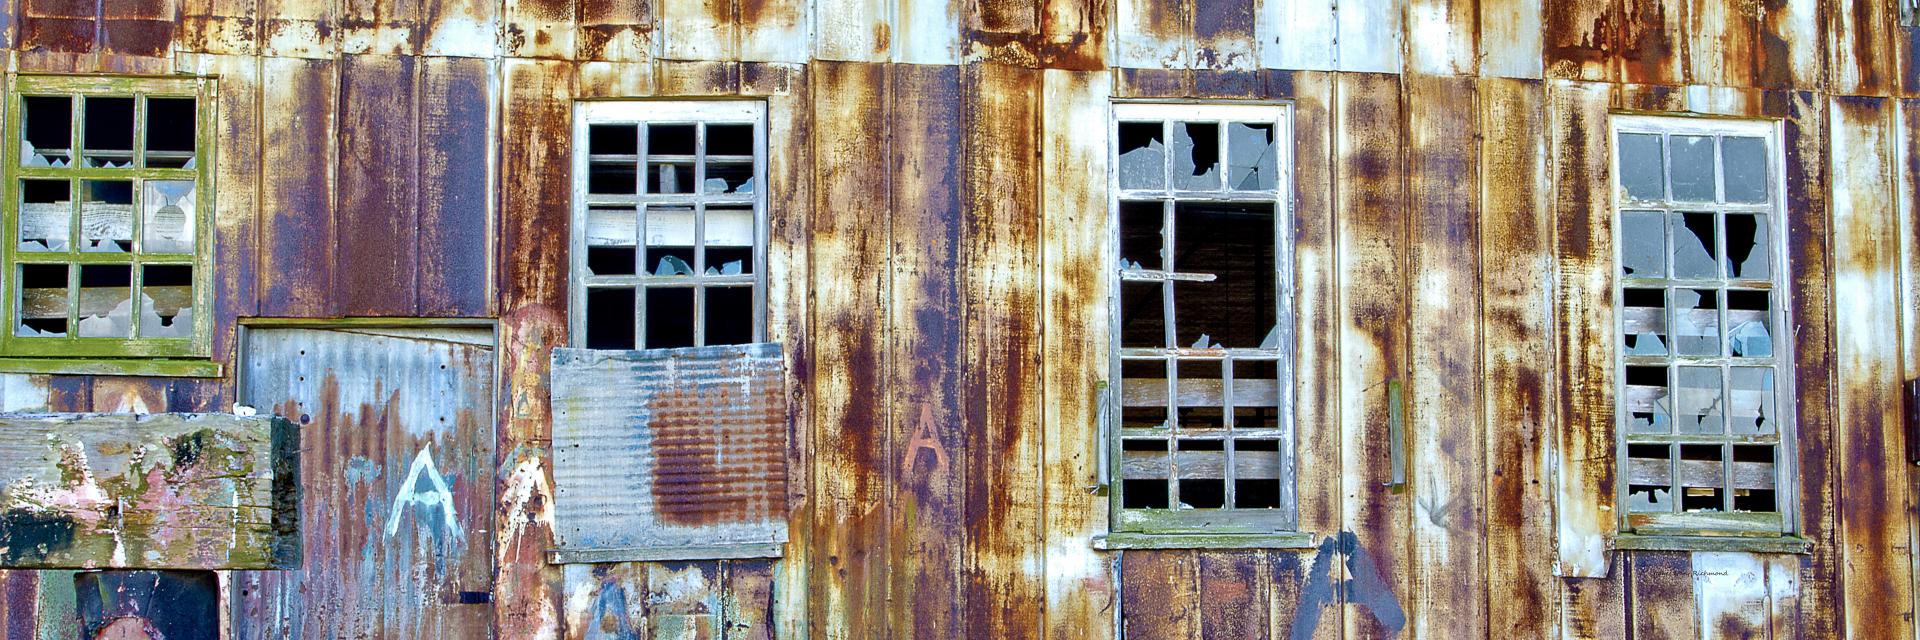 44318p abandonded rust weathered windows architecture,,.jpg